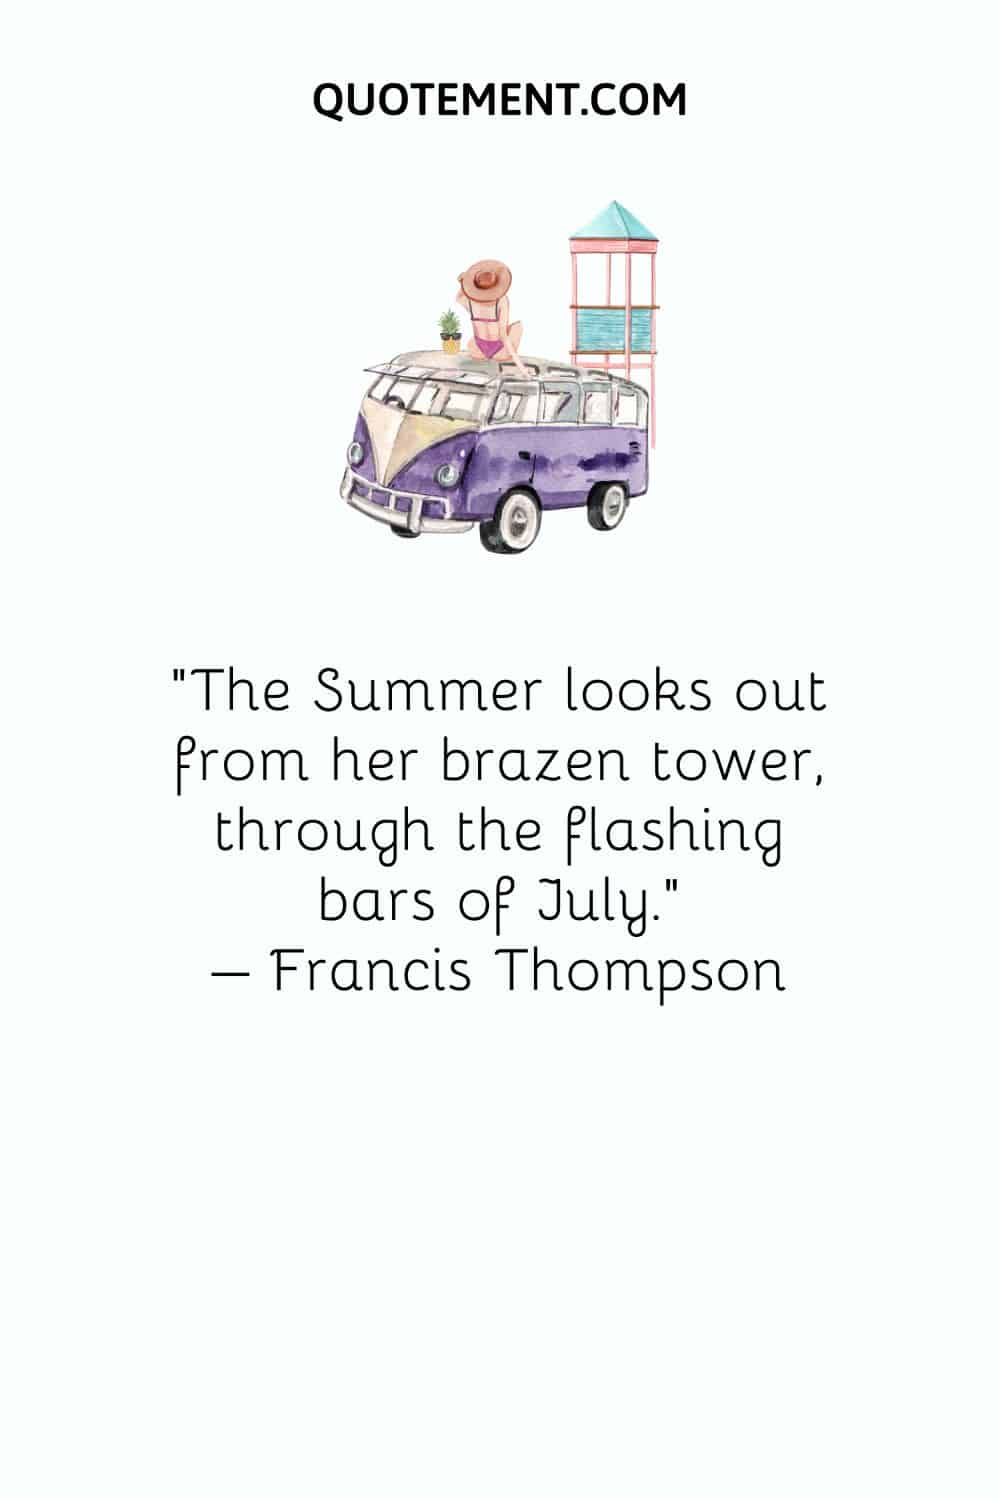 The Summer looks out from her brazen tower, through the flashing bars of July. – Francis Thompson